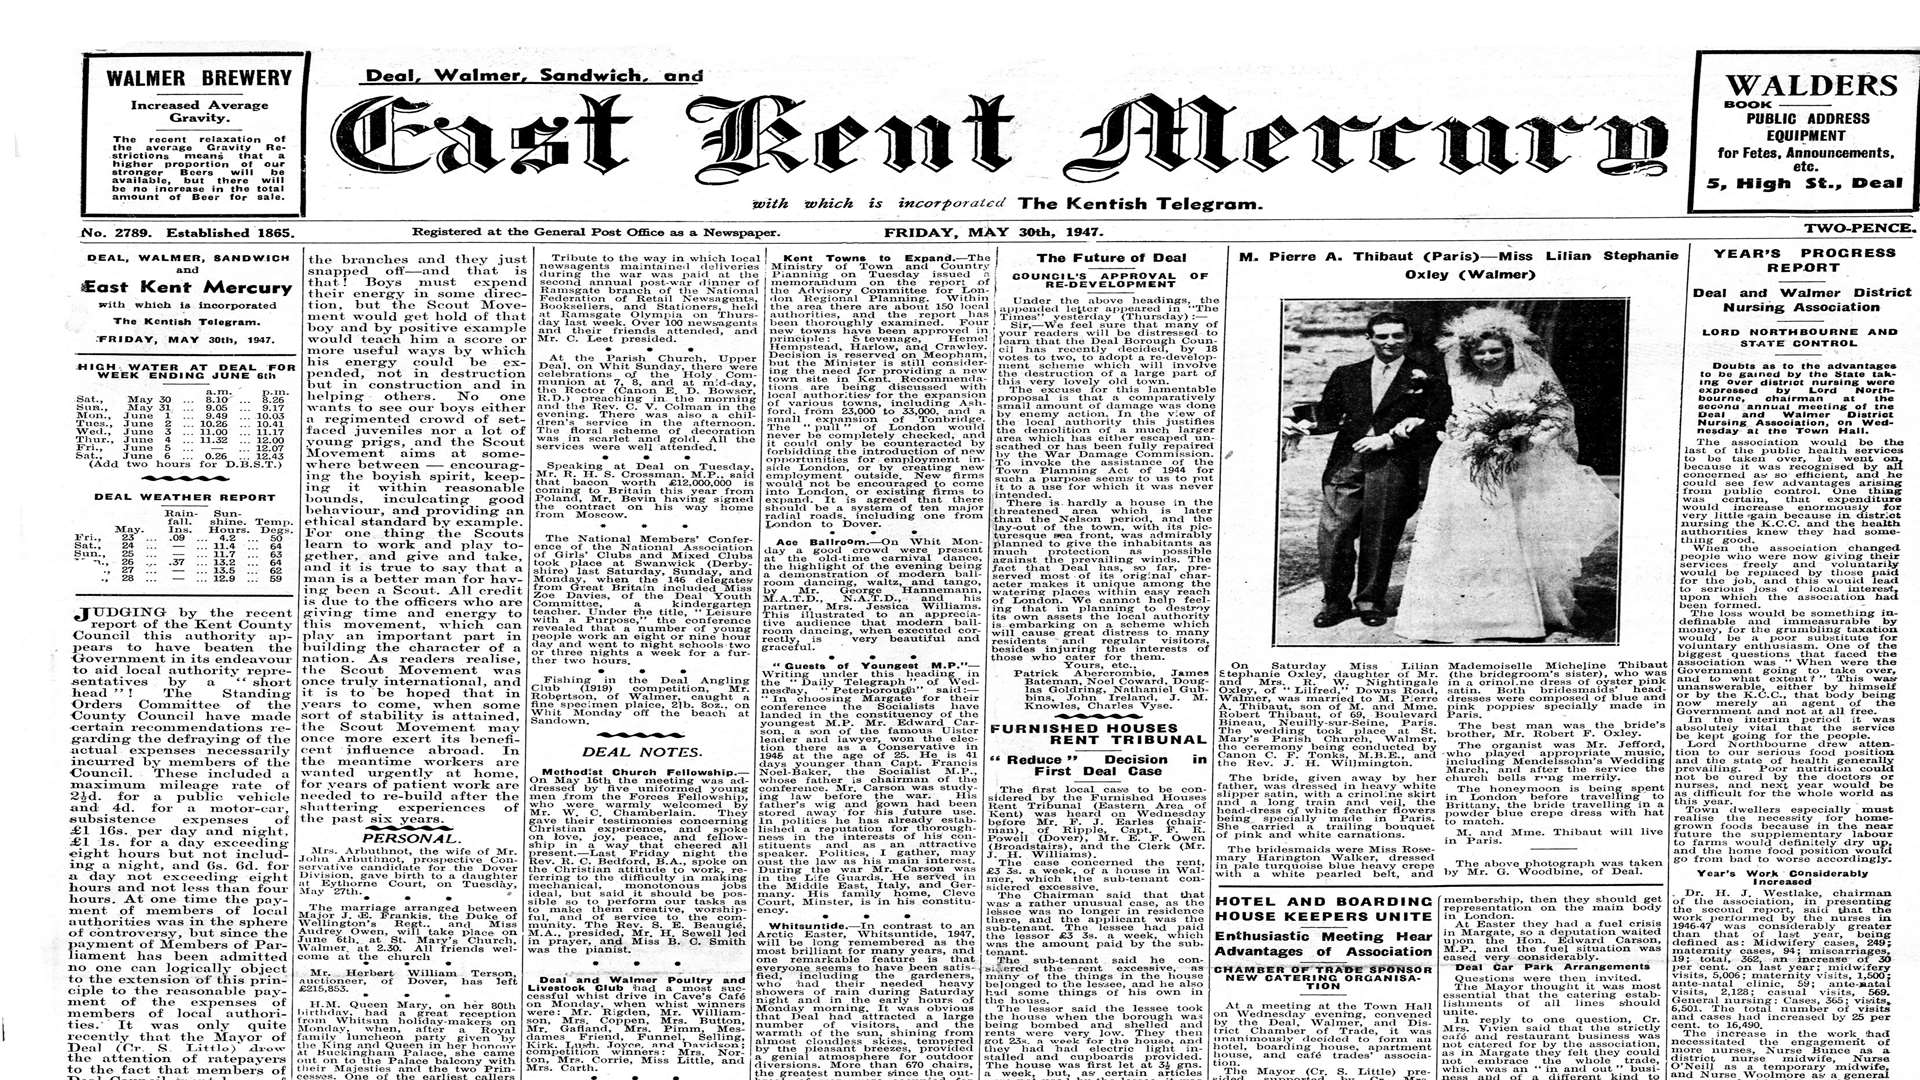 May 30, 1947 - a picture appears on the front page for the first time